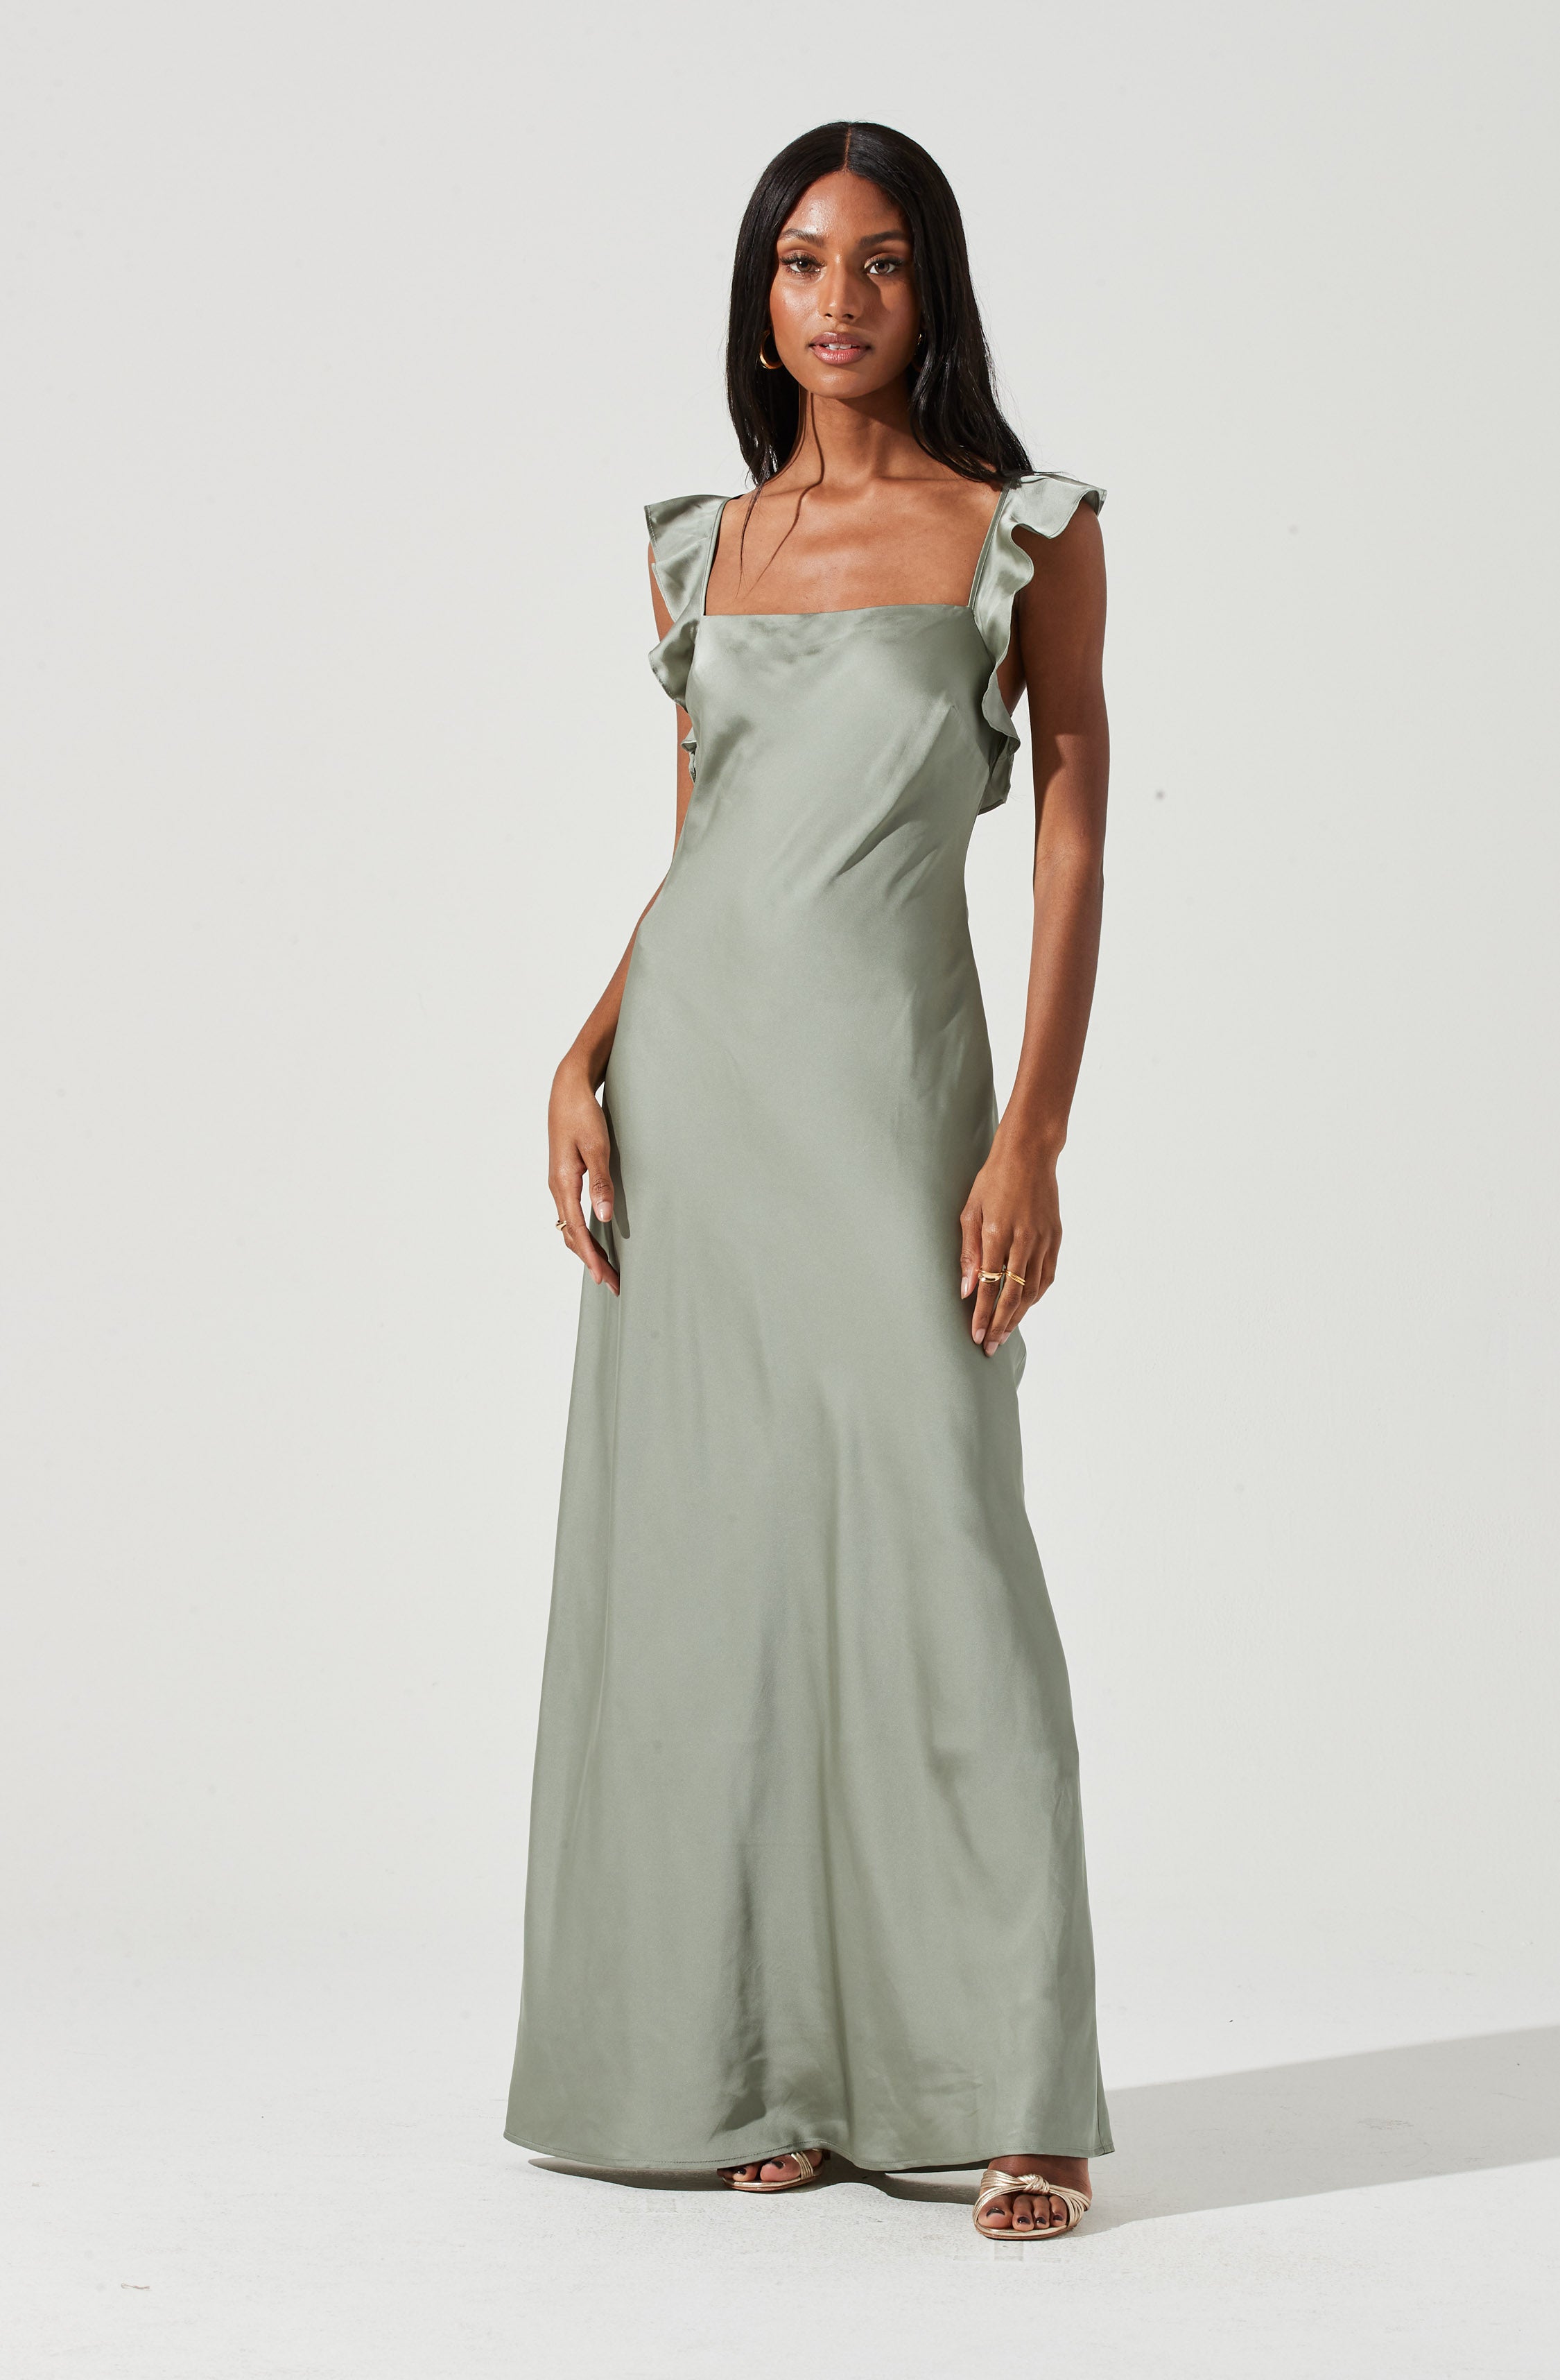 Ruffle Strap Labor & Delivery Gown